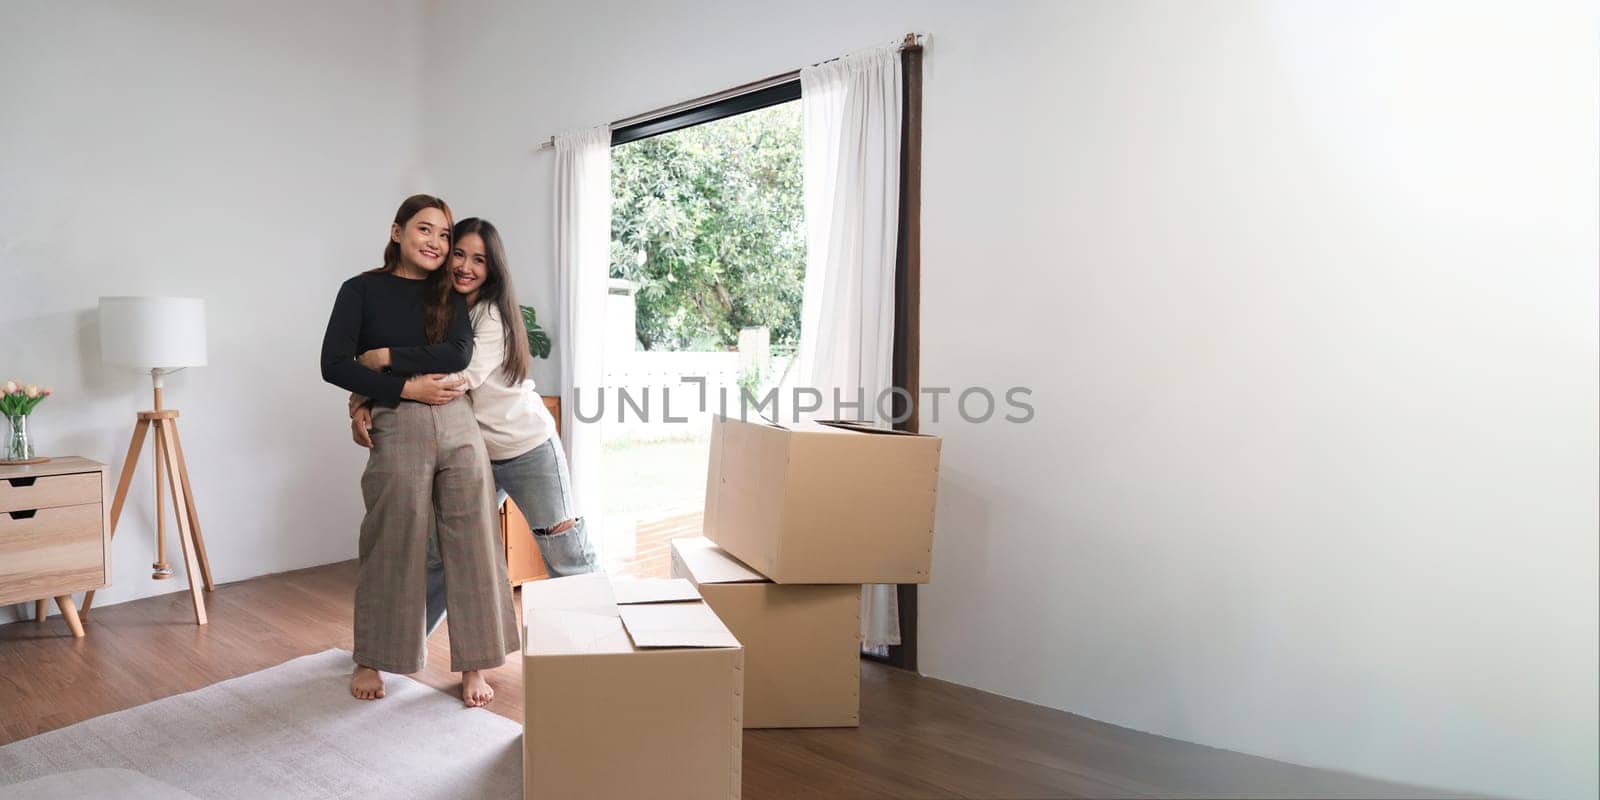 Homosexual happy young Asian woman hug girlfriend after moving stuff to a new rent house.